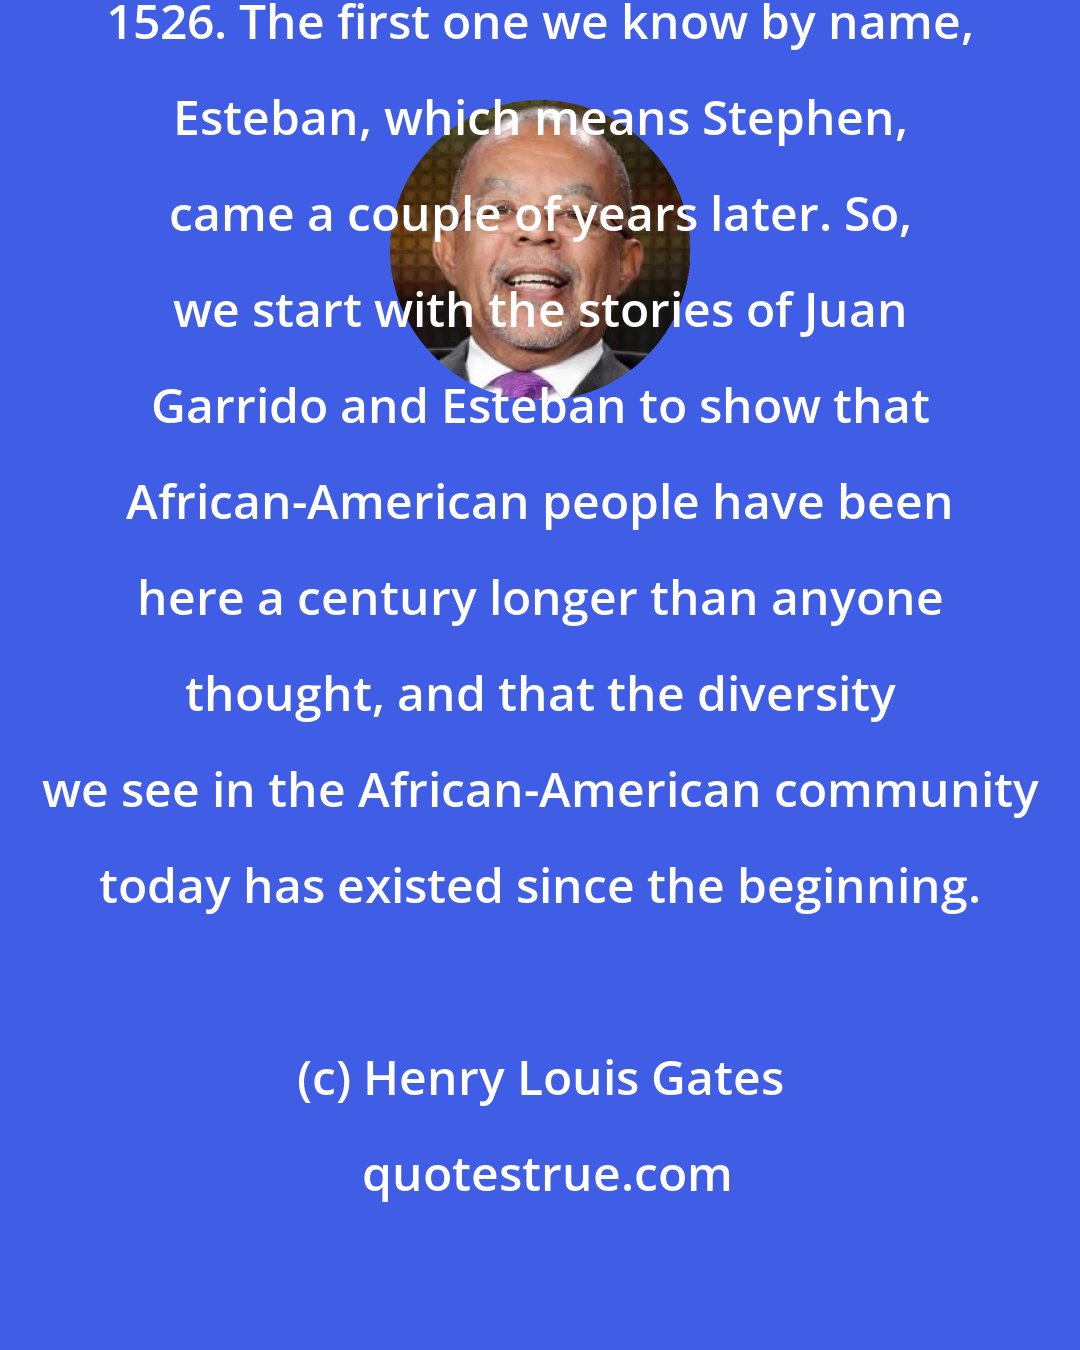 Henry Louis Gates: The first slave came to Florida in 1526. The first one we know by name, Esteban, which means Stephen, came a couple of years later. So, we start with the stories of Juan Garrido and Esteban to show that African-American people have been here a century longer than anyone thought, and that the diversity we see in the African-American community today has existed since the beginning.